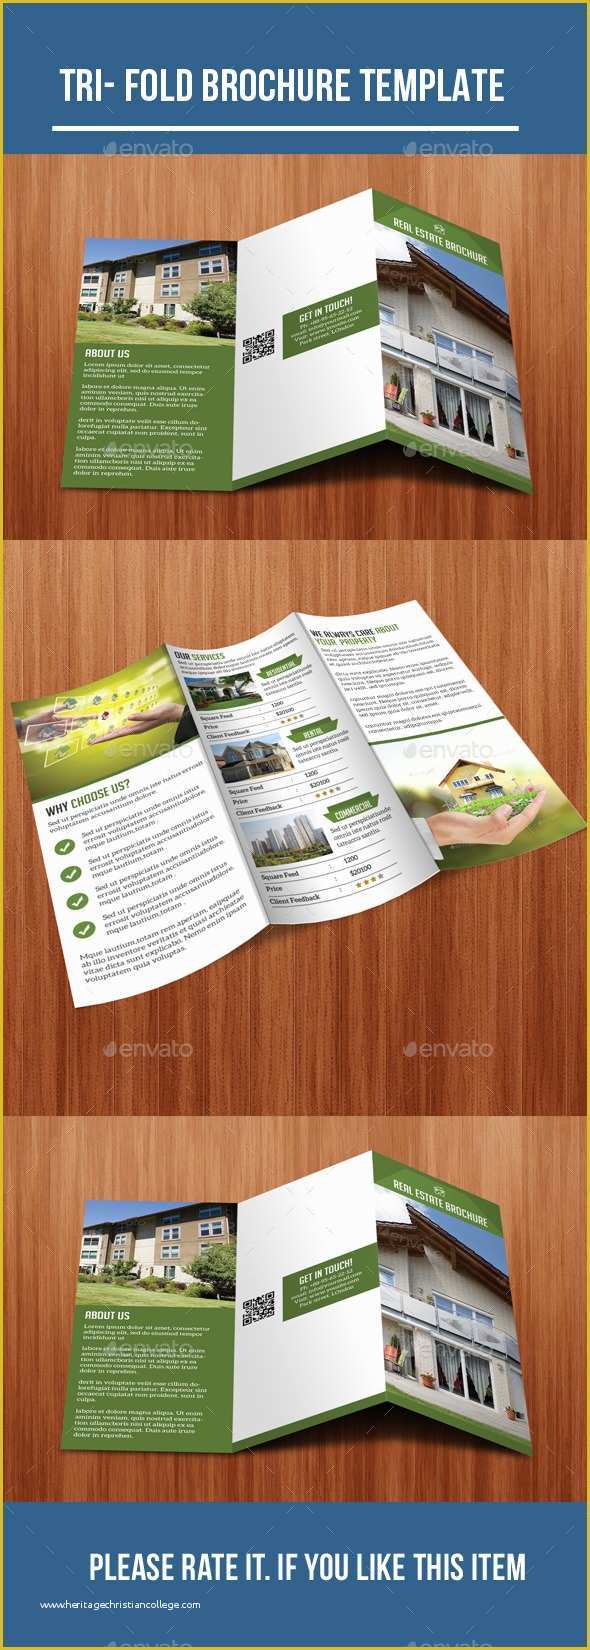 Free Brochure Templates for Students Of Free Tri Fold Brochure Templates for Students Tinkytyler